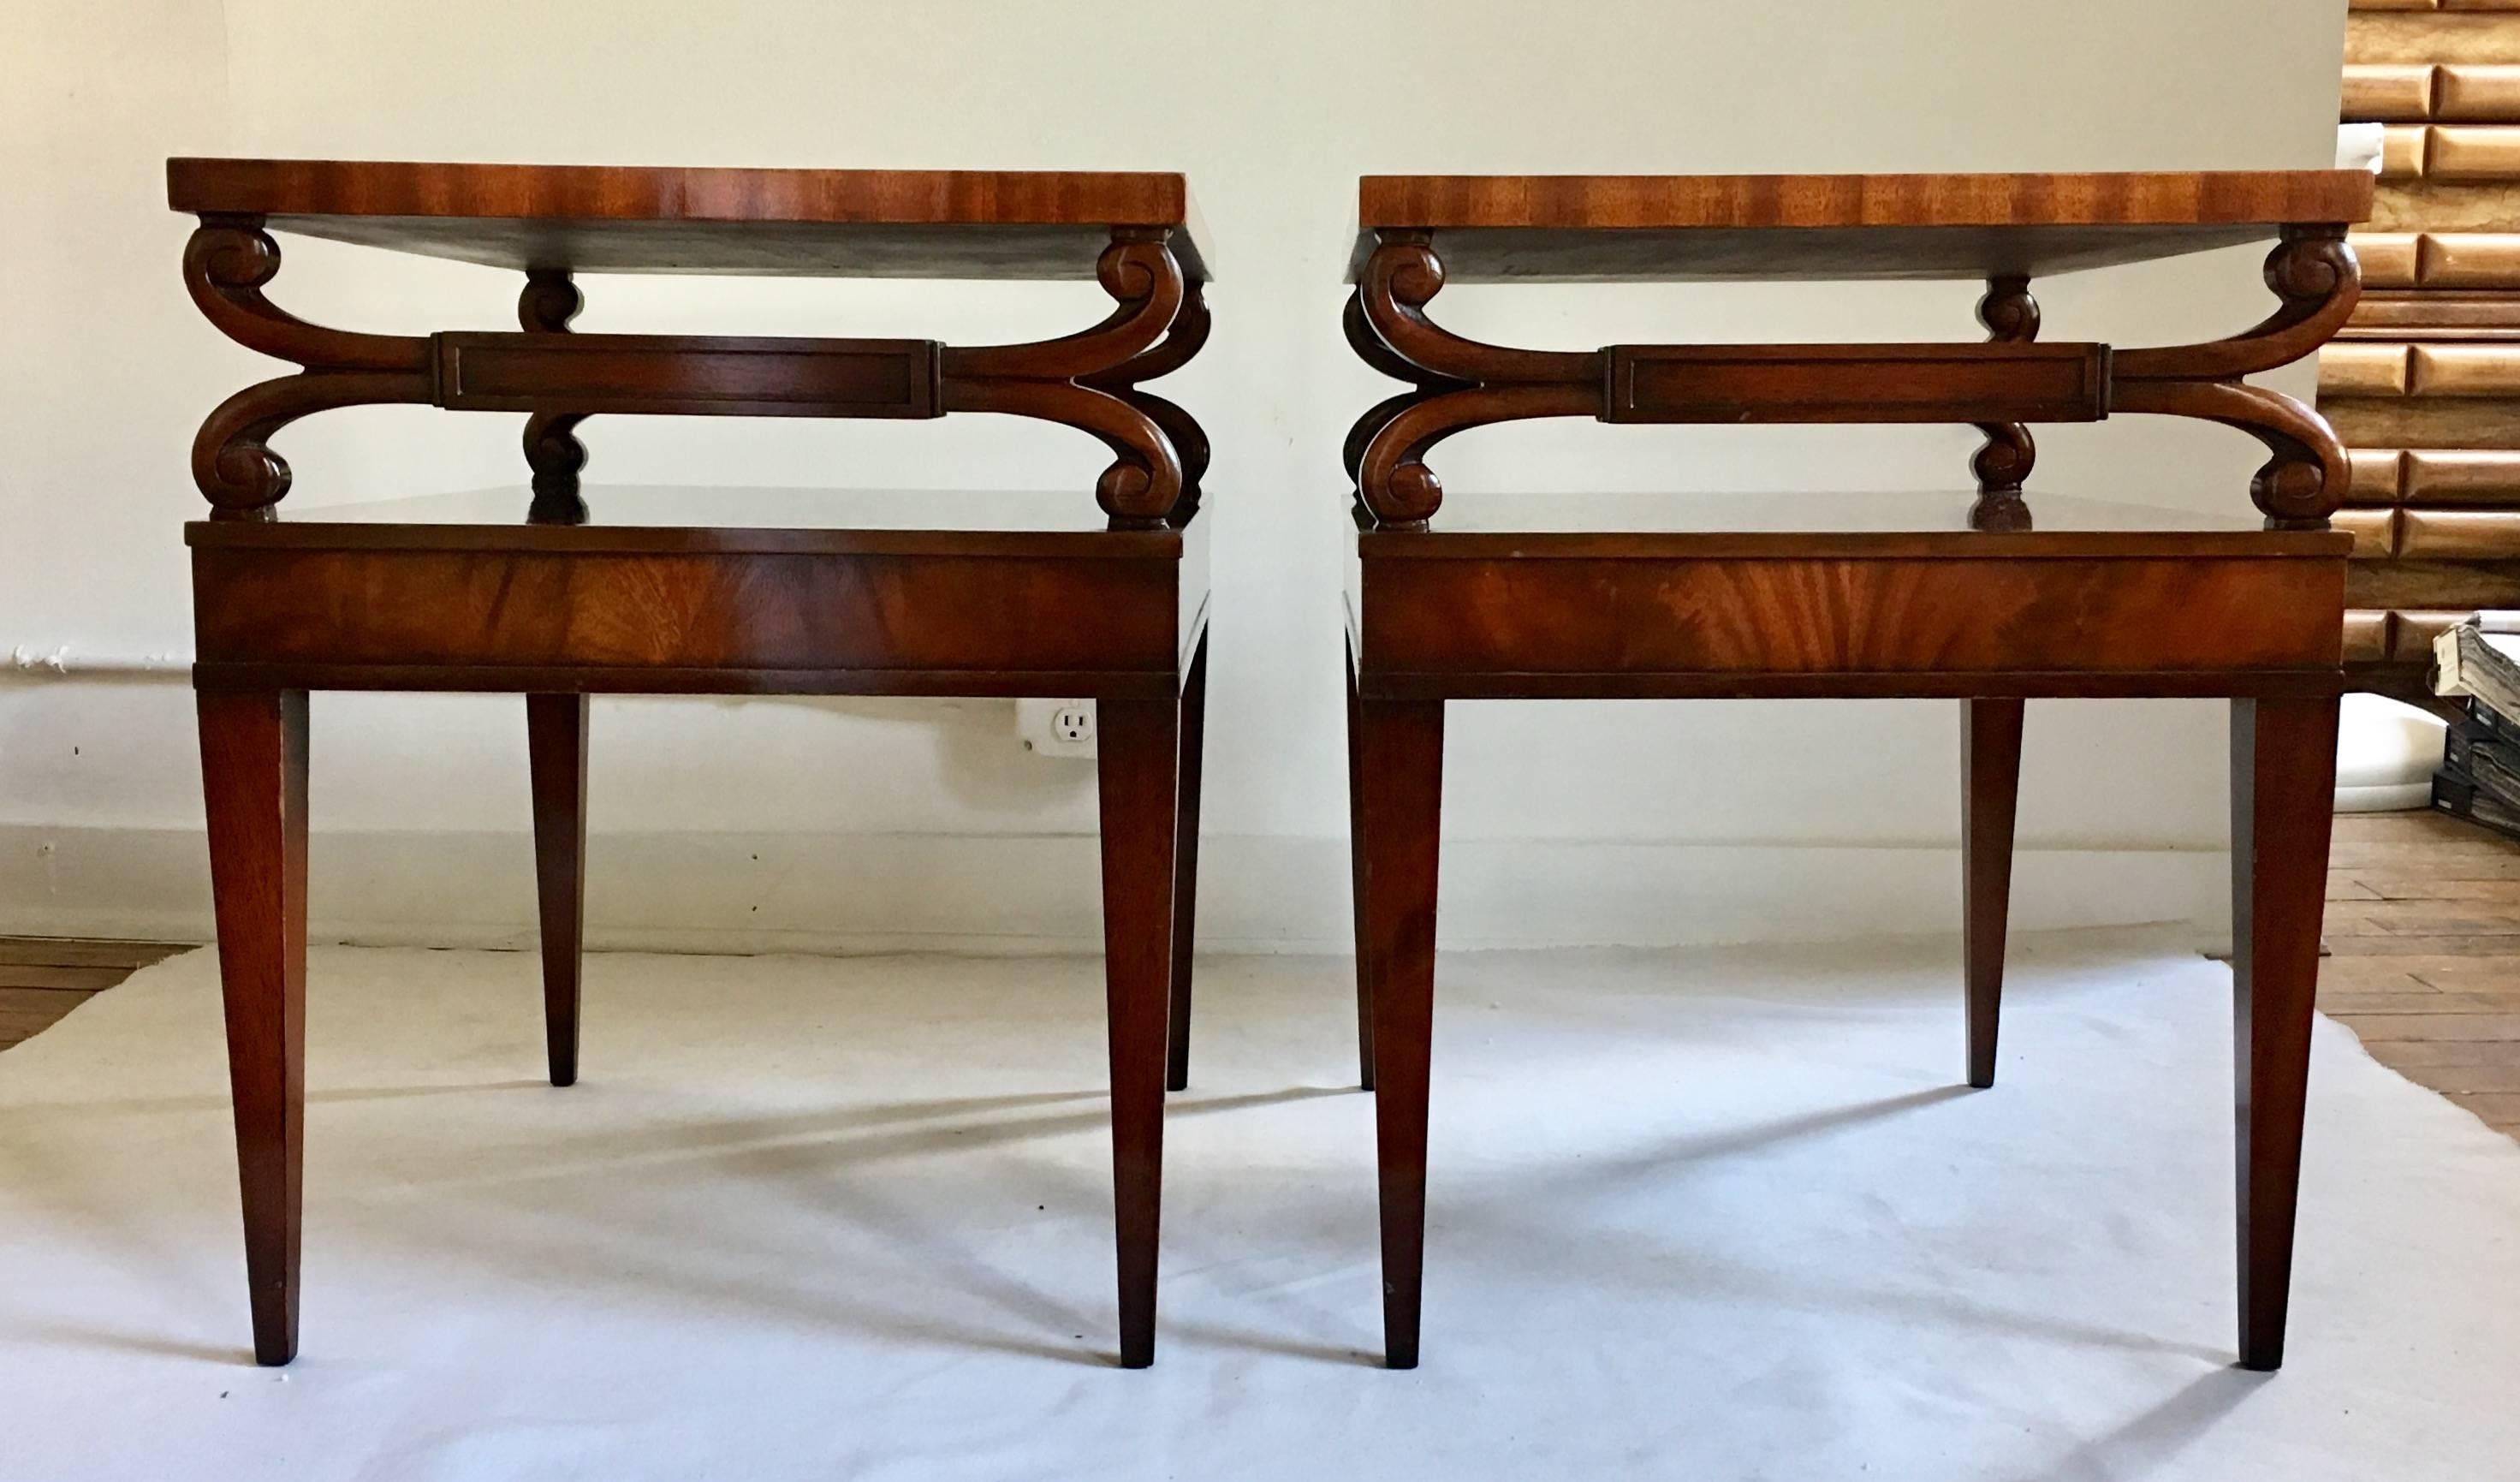 Midcentury Regency style two tier side tables from Weiman's Heirloom collection. Mahogany wood frames feature carved scroll details, gold scribed brown leather tops, and tapered legs. Stamped 